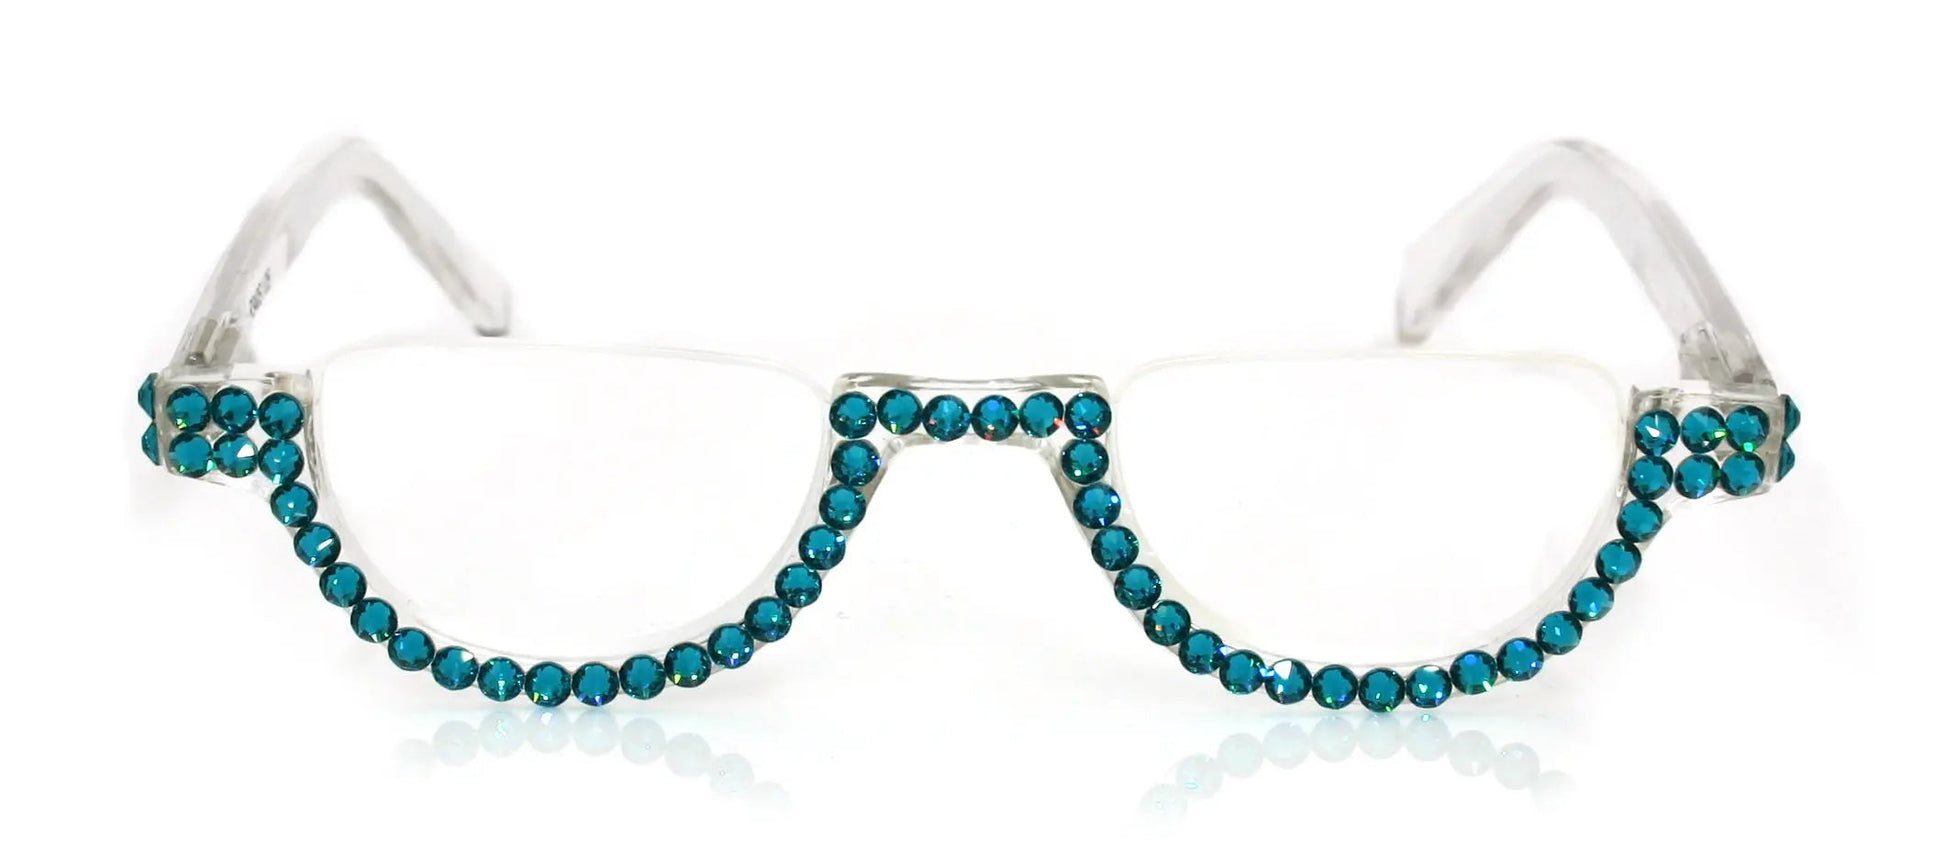 Half Moon, (Bling) Woman Reading Glasses Adorned W (Blue Zircon)  Genuine European Crystals  +1.25..+4  Lower Nose, NY Fifth Avenue